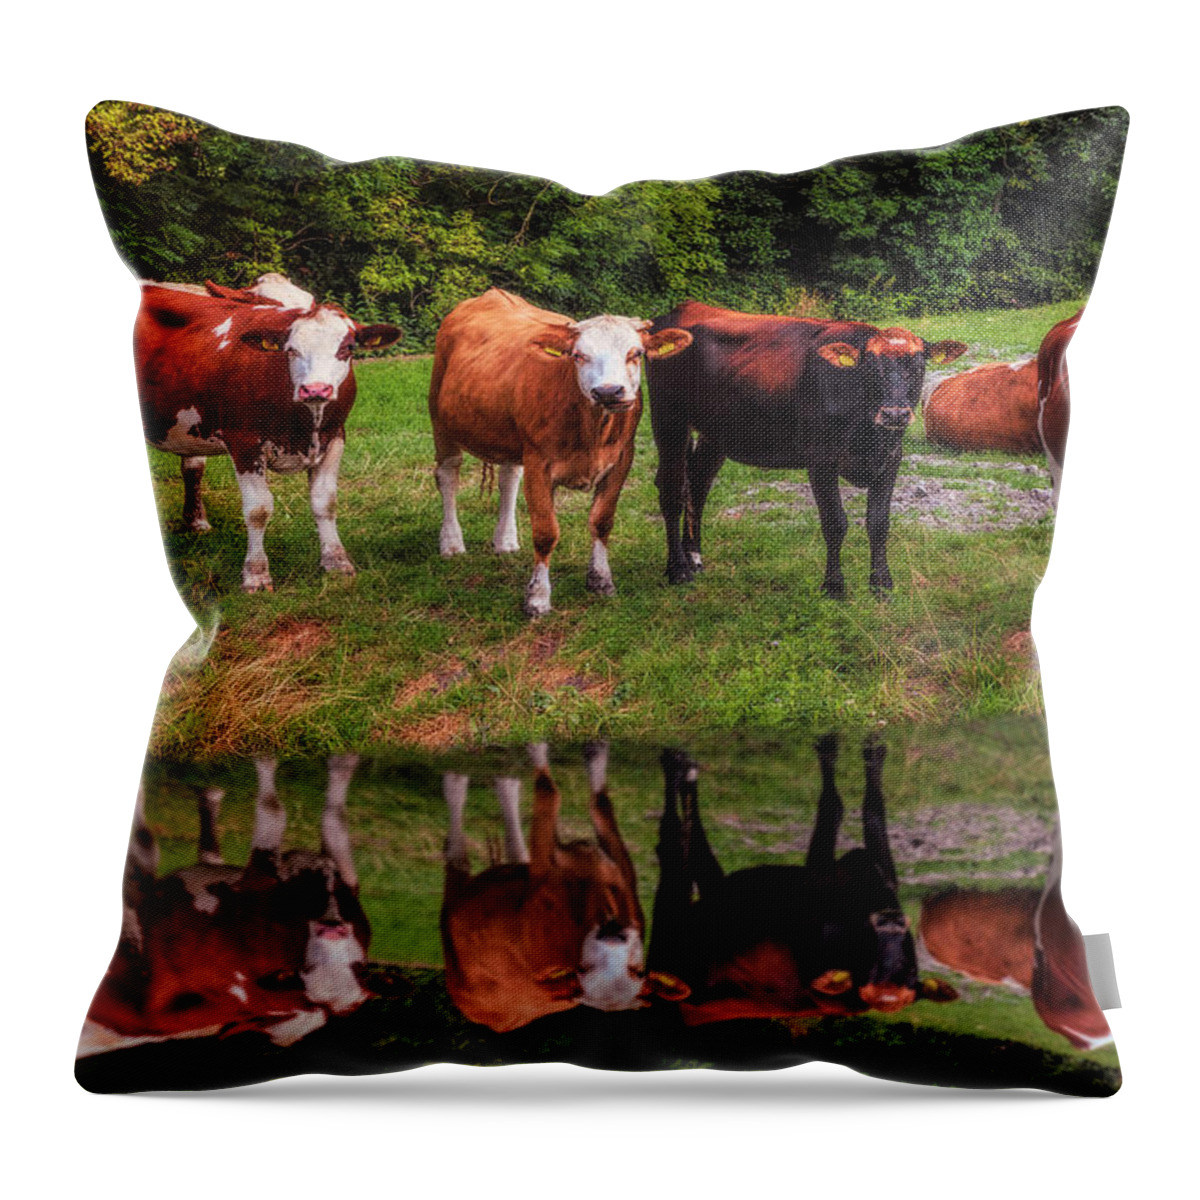 Animals Throw Pillow featuring the photograph Saying Hello in the Morning Sun by Debra and Dave Vanderlaan